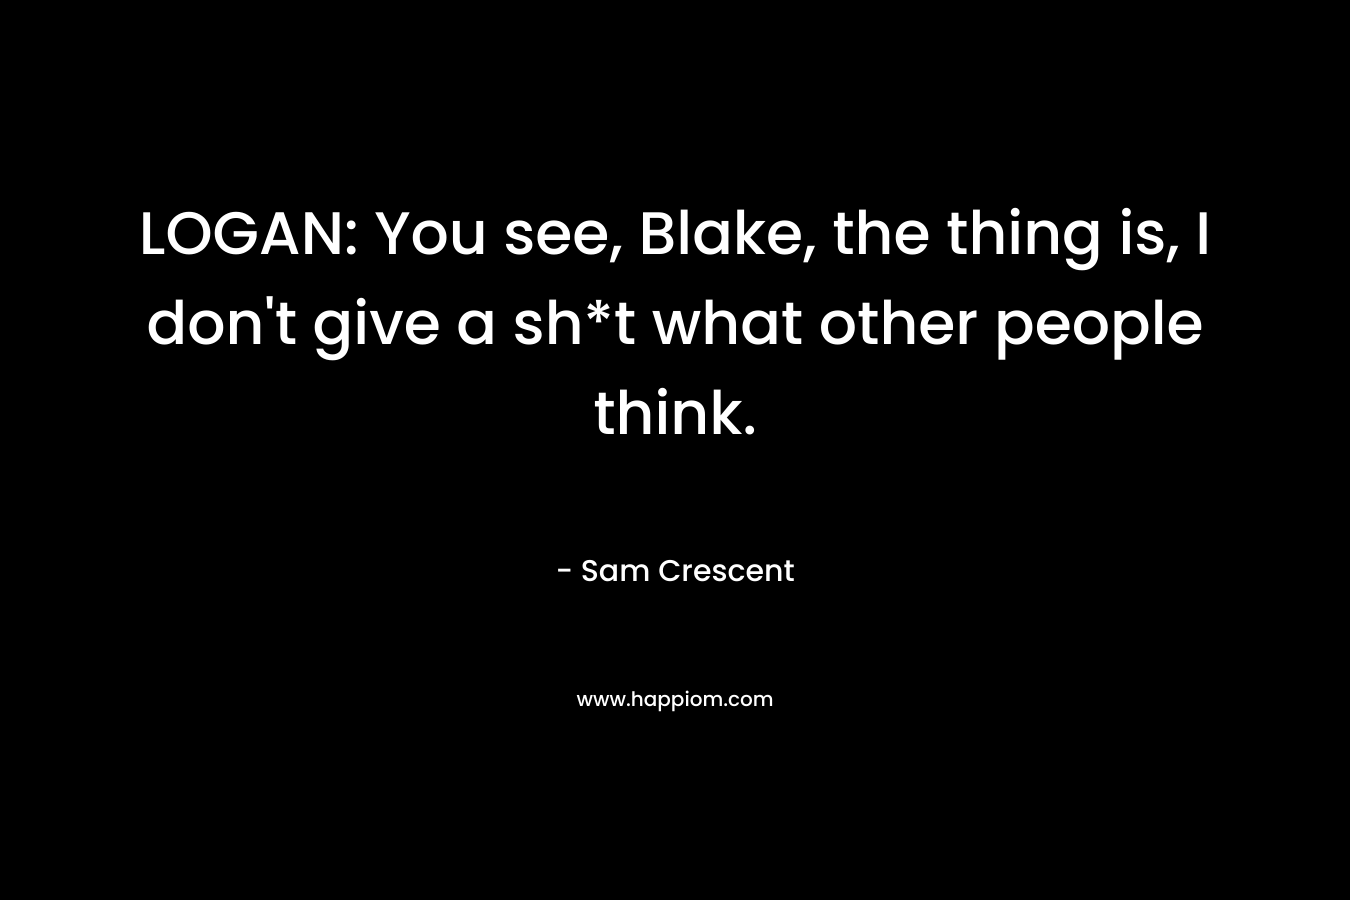 LOGAN: You see, Blake, the thing is, I don't give a sh*t what other people think.